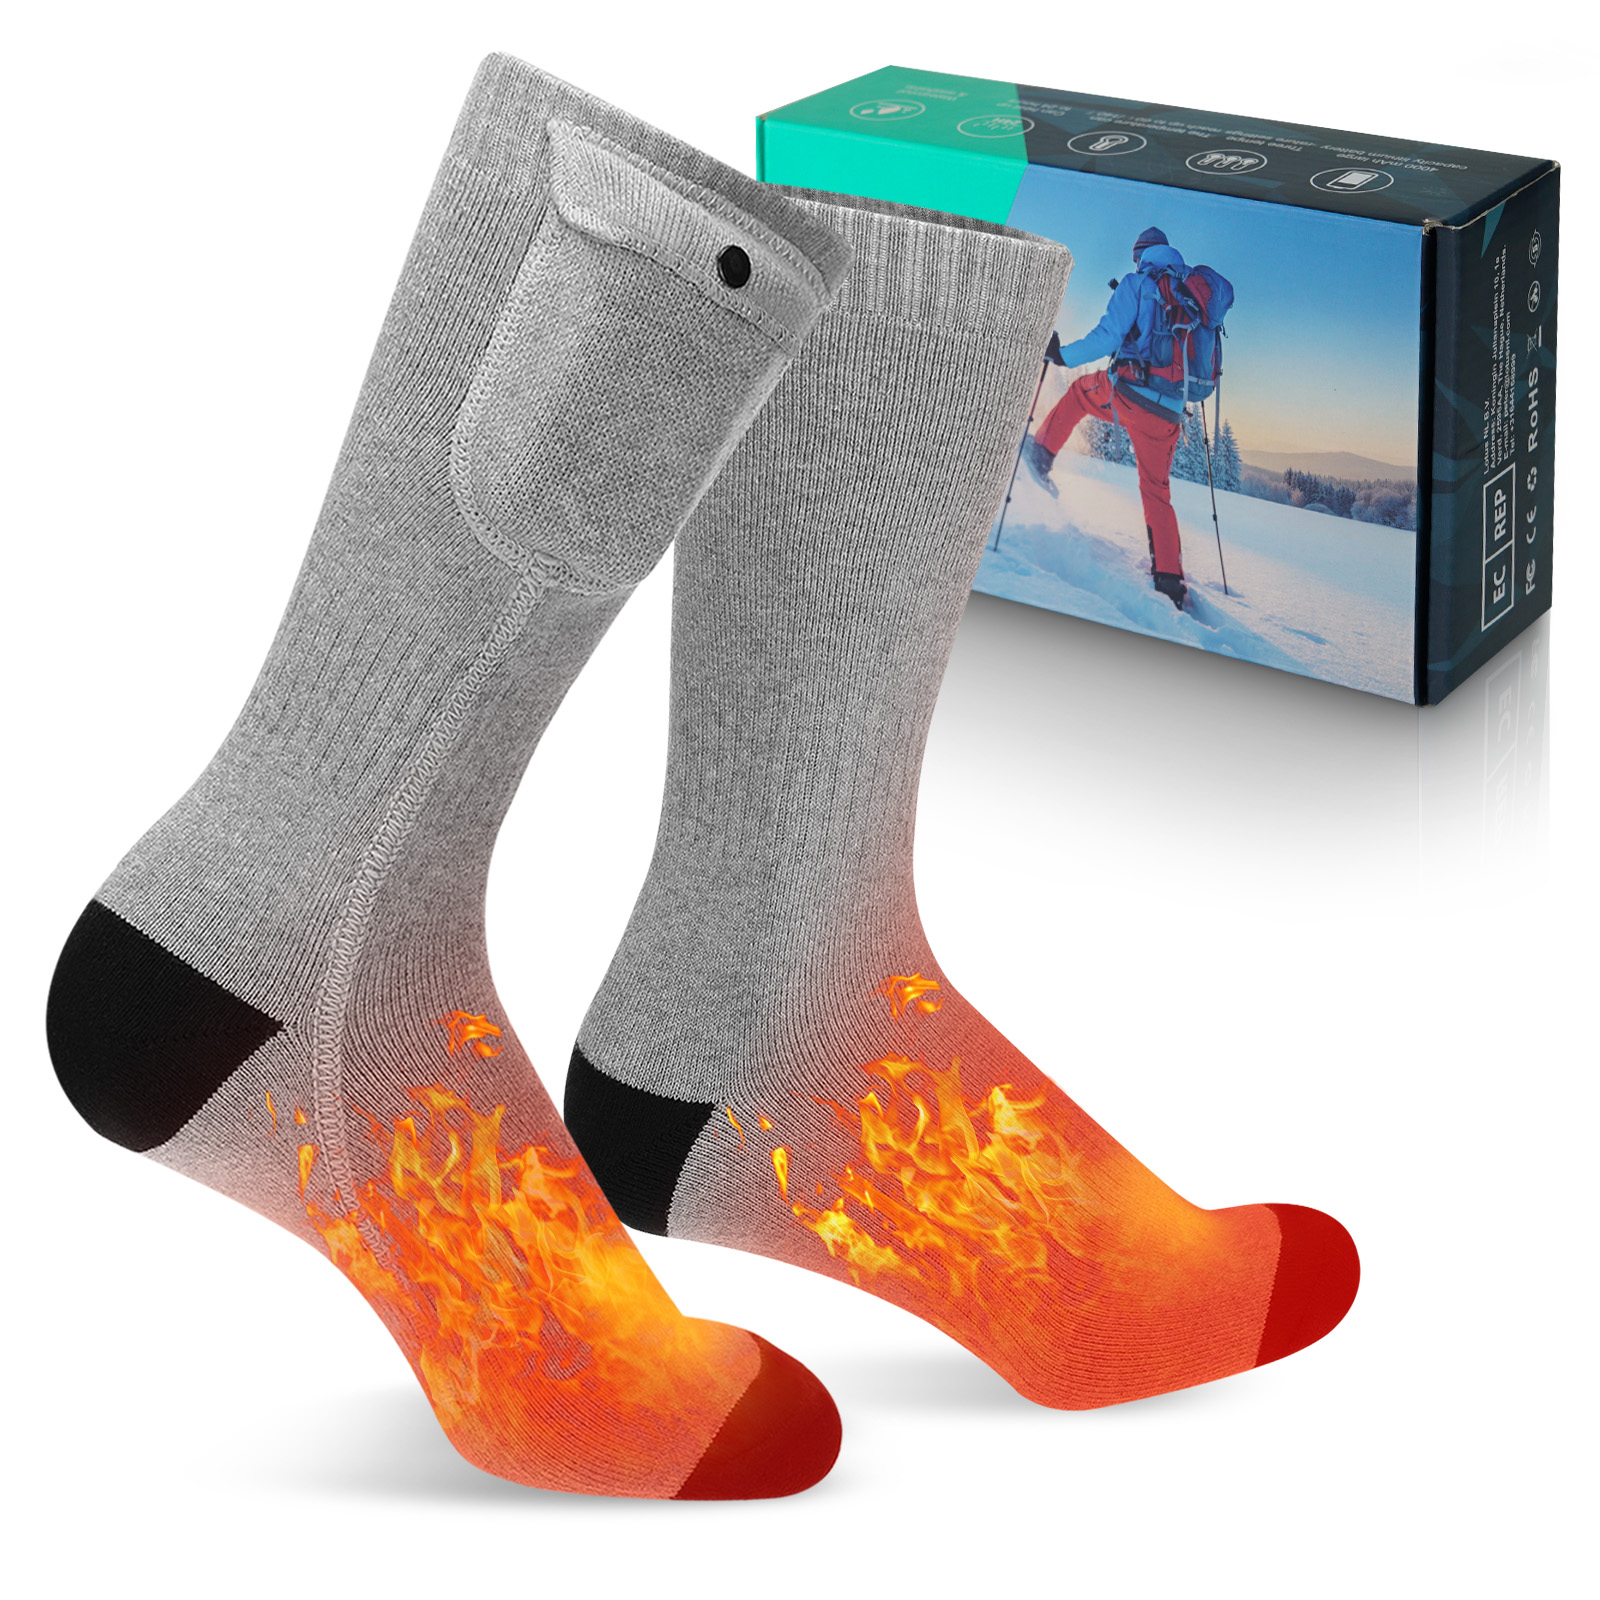 Down and Up Heating Rechargeable Socks Electric Heating Socks Heated Socks 